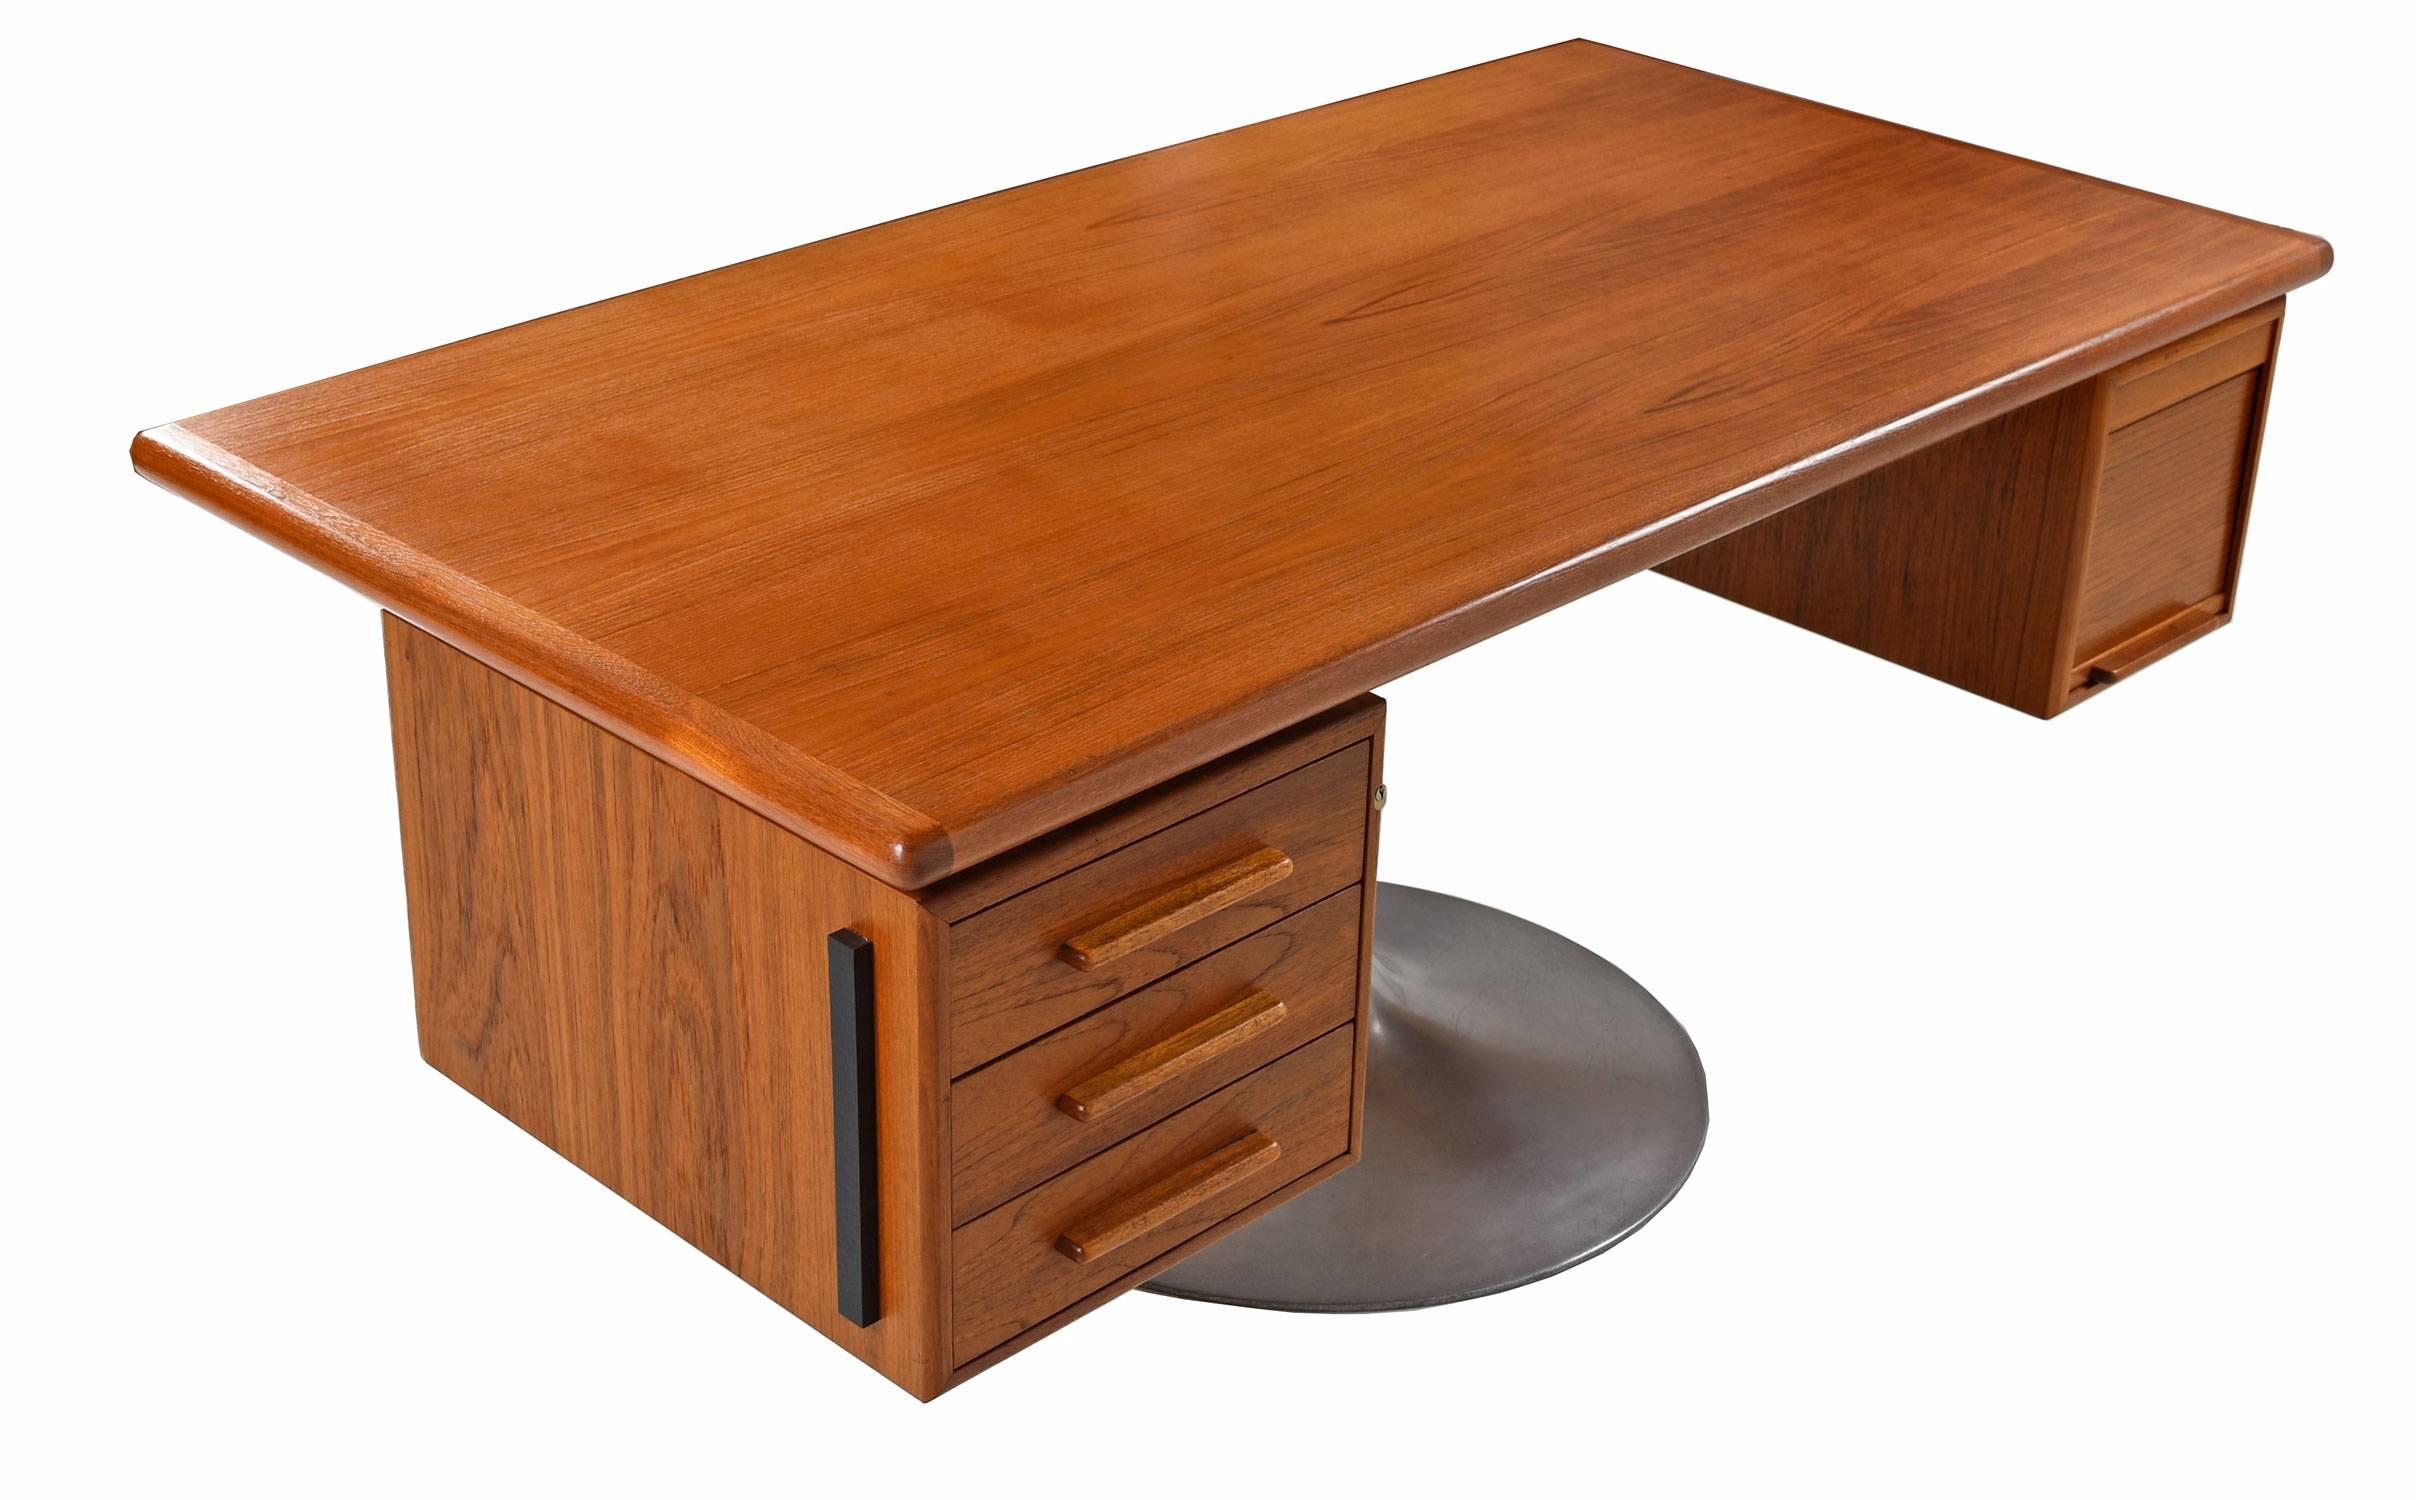 Absolutely stunning bespoke teak executive desk on a large pedestal base. This one-of-a-kind piece was created at furnish me vintage. The desk was fabricated from salvaged vintage parts including components from a modular Danish teak office system